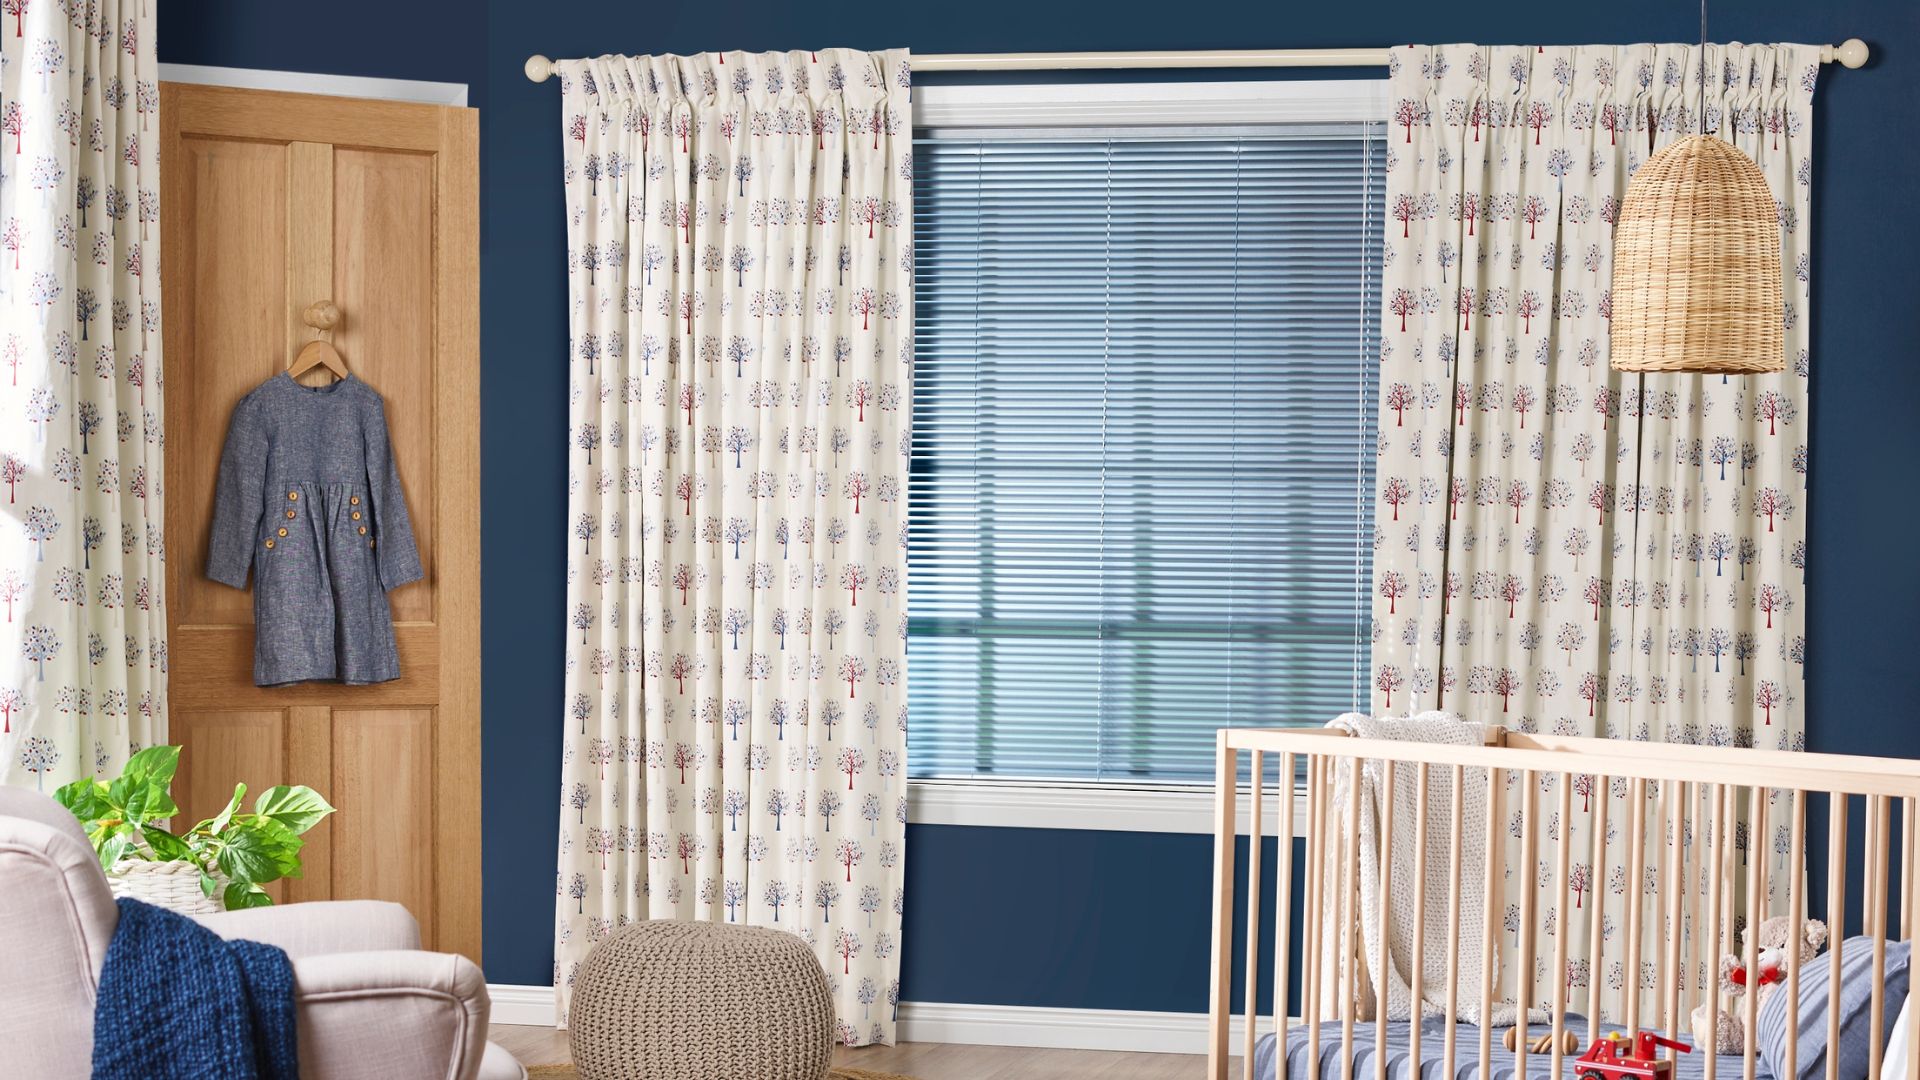 Venetian blinds layered with printed fabric curtains